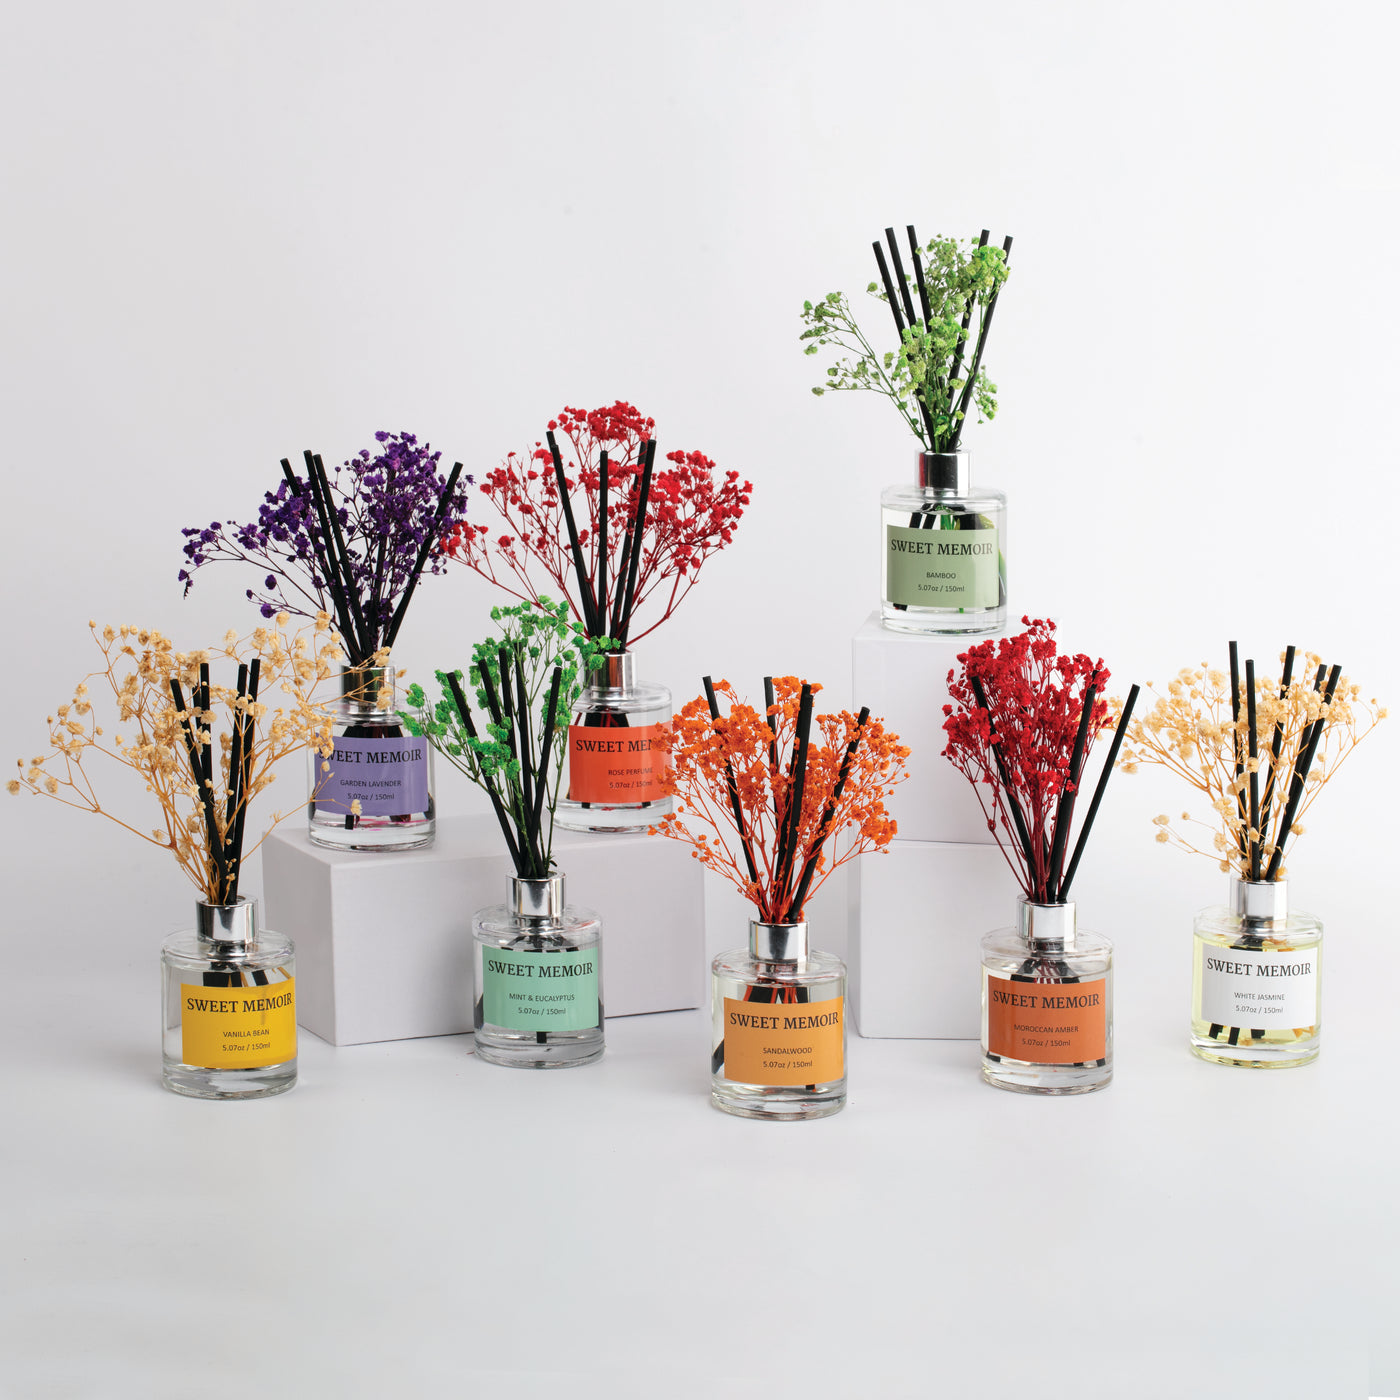 A diverse selection of Sweet Memoir reed diffusers with colorful oils and reeds displayed in a gradient arrangement.